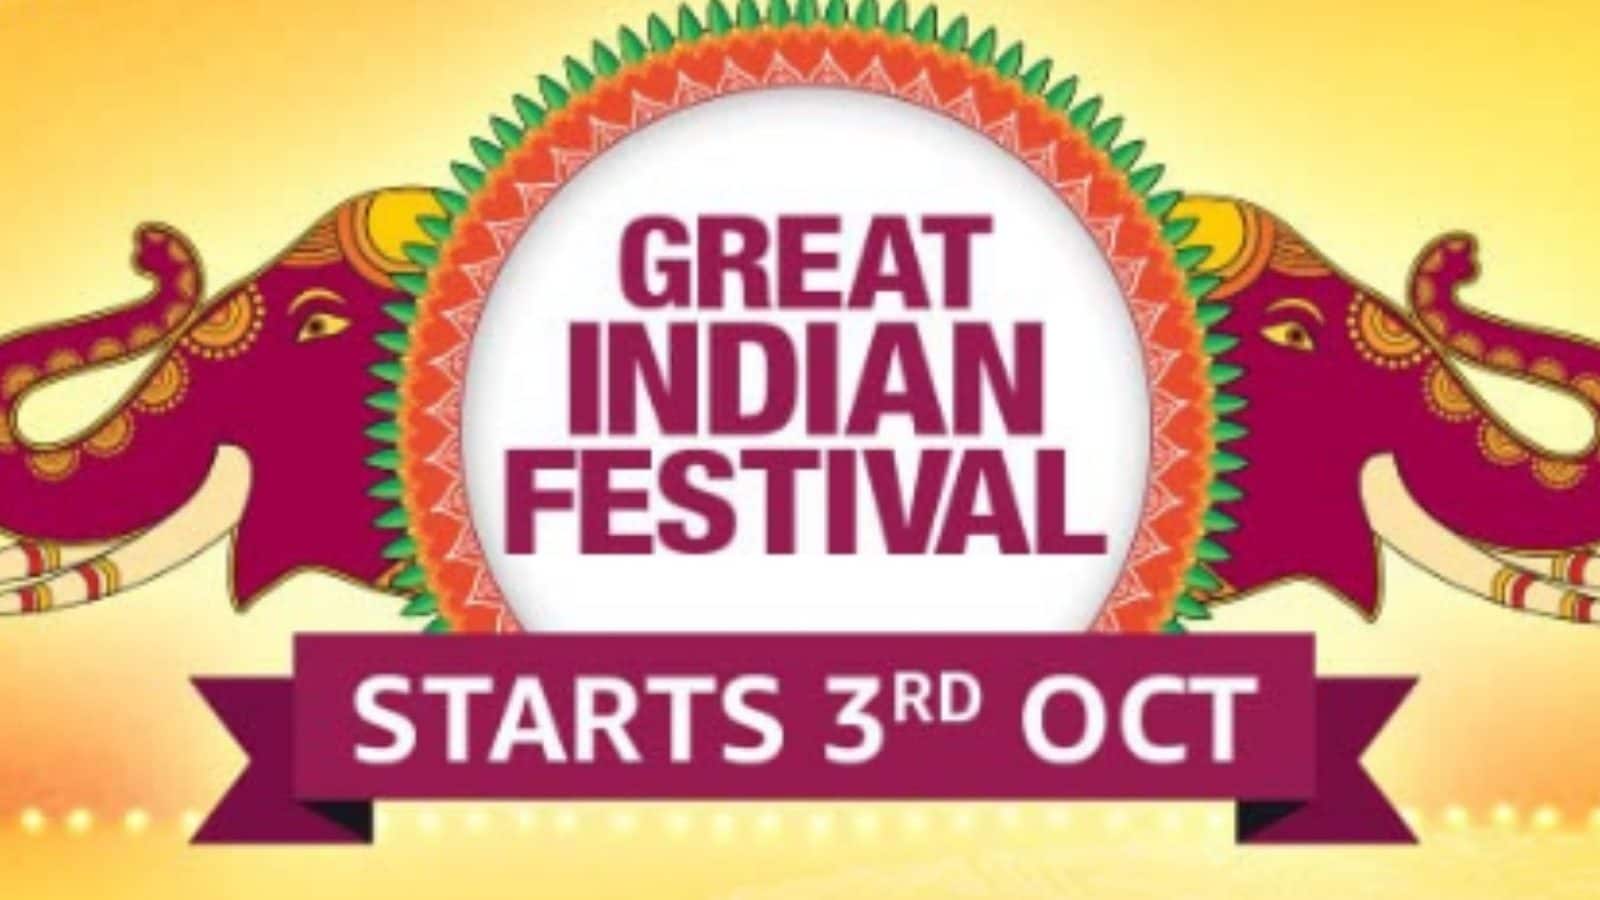 Amazon Great Indian Festival Dates Changed, Now Coincides With Flipkart Sale Event